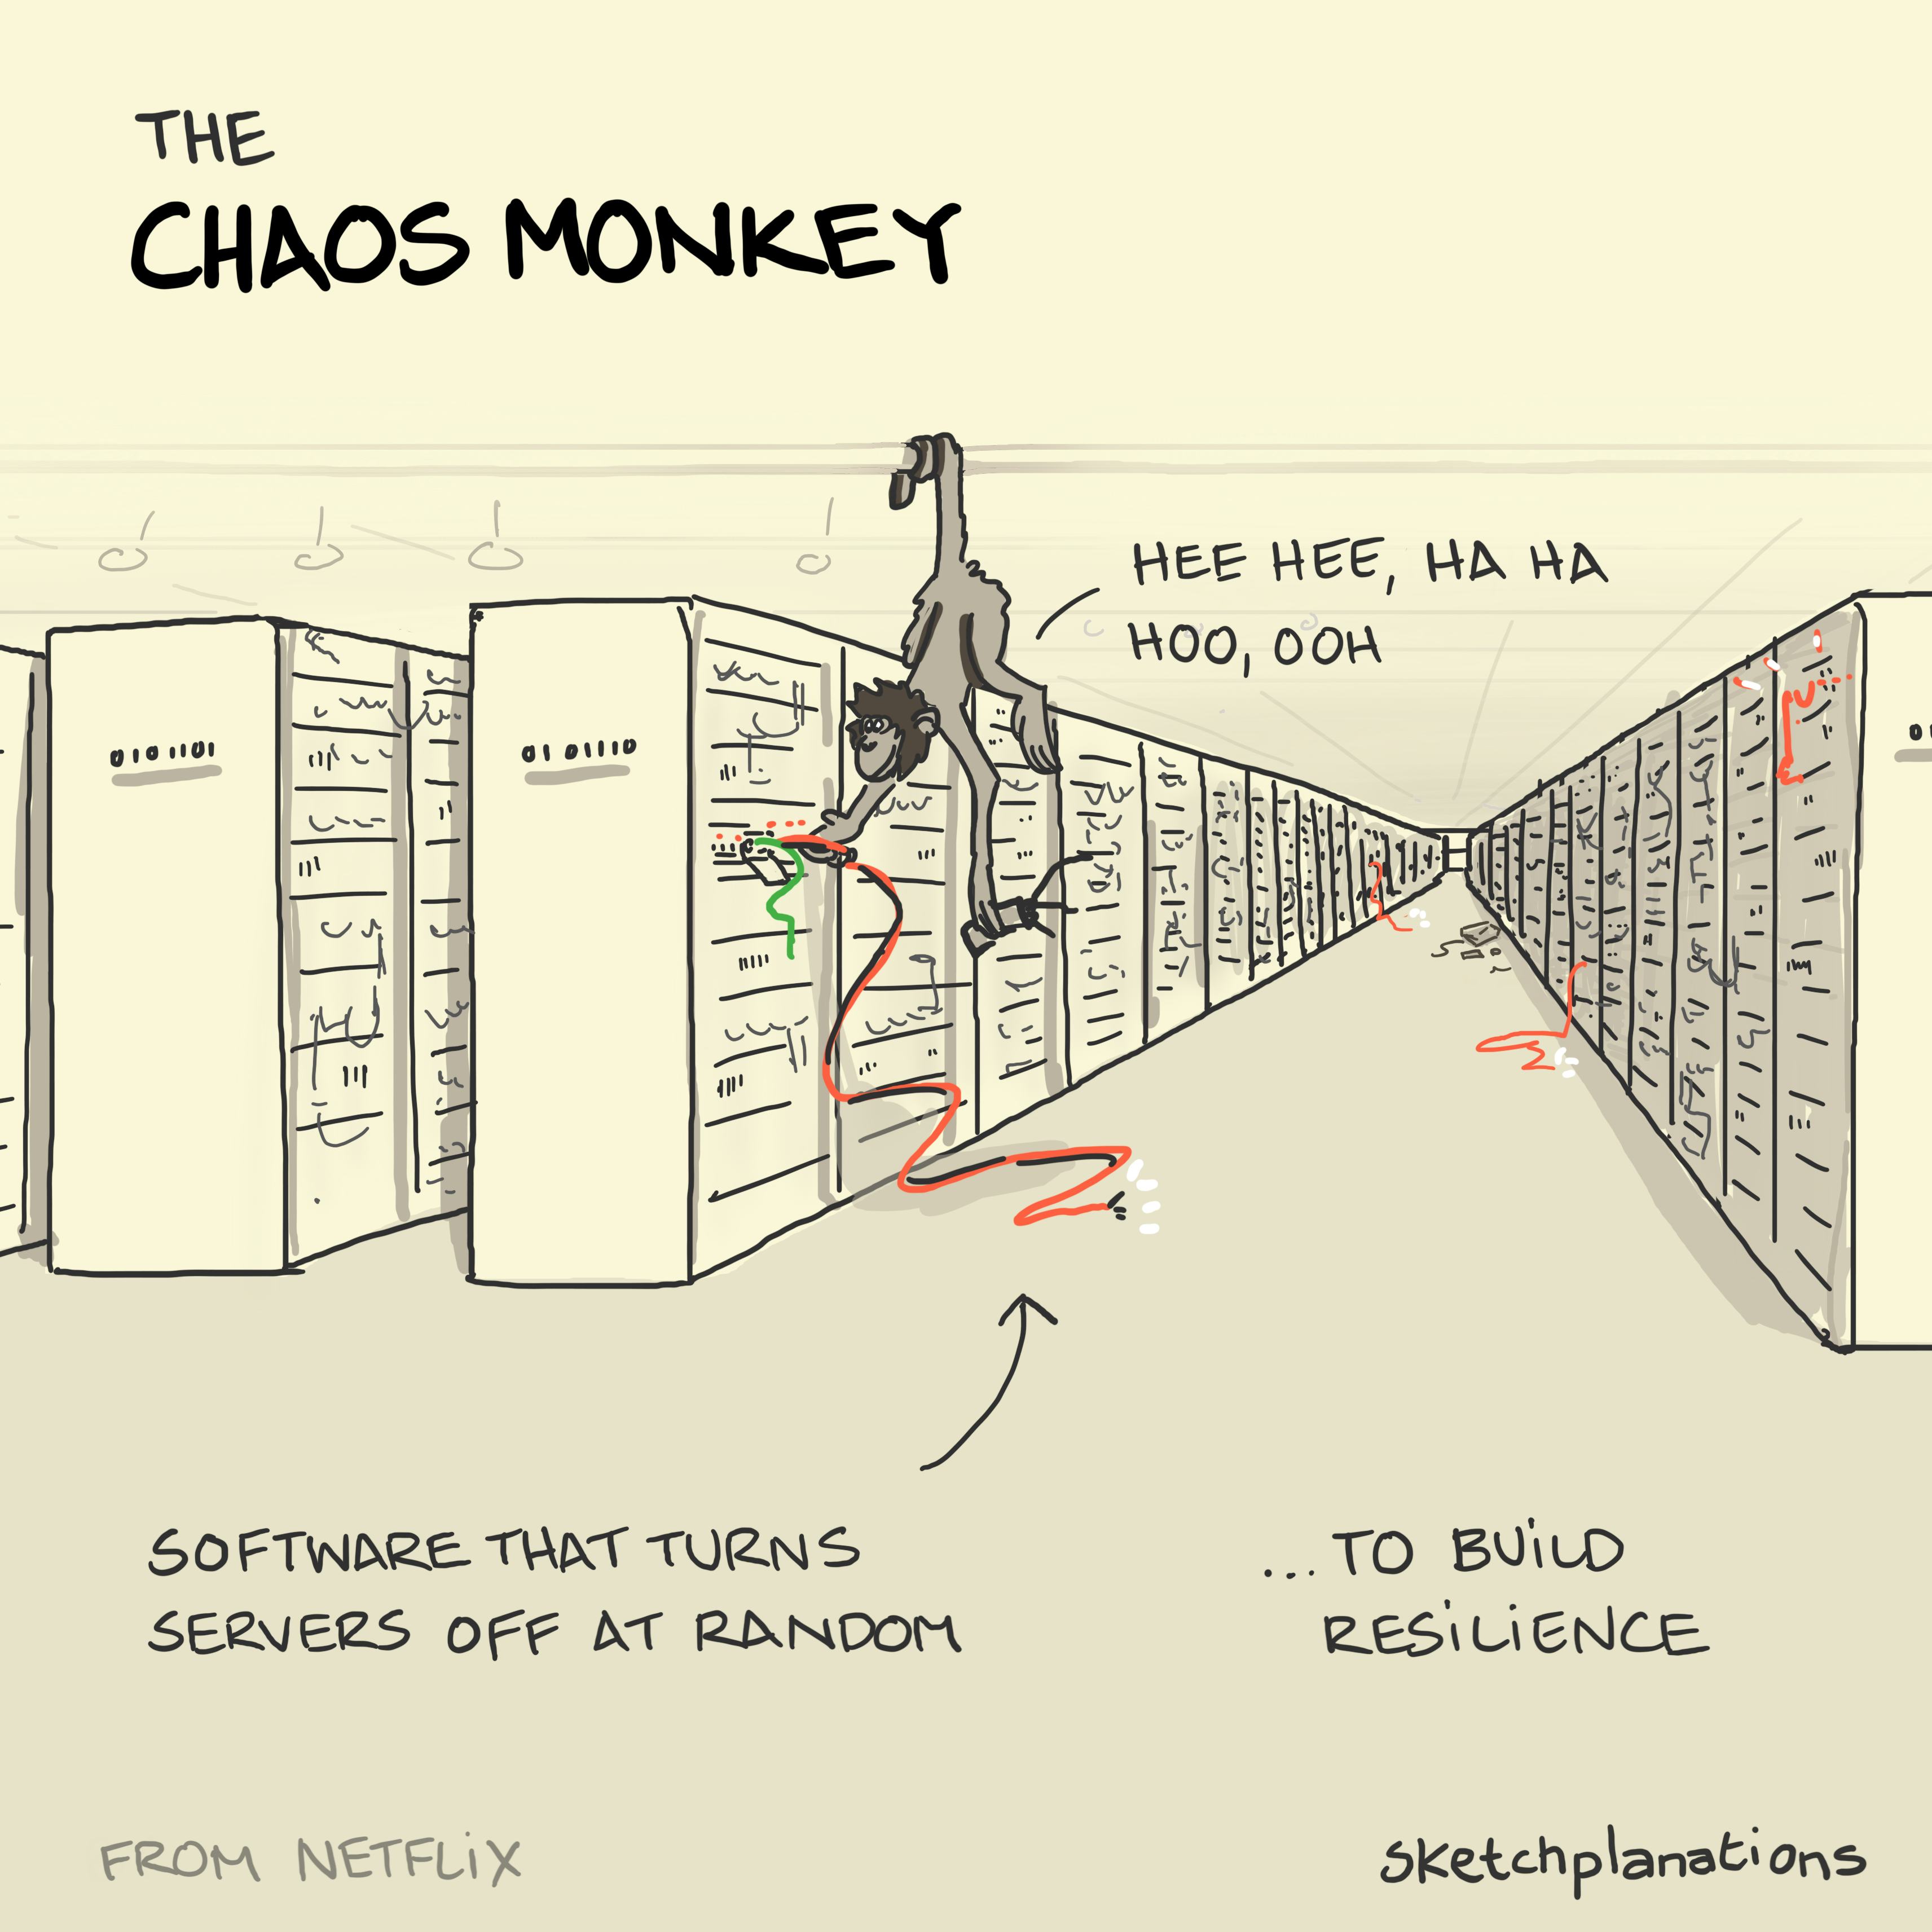 Chaos monkey illustration: A monkey hangs from a girder in a room of servers cheekily pulling out wires to simulate the servers turning off at random and to build resilience, the Netflix principle